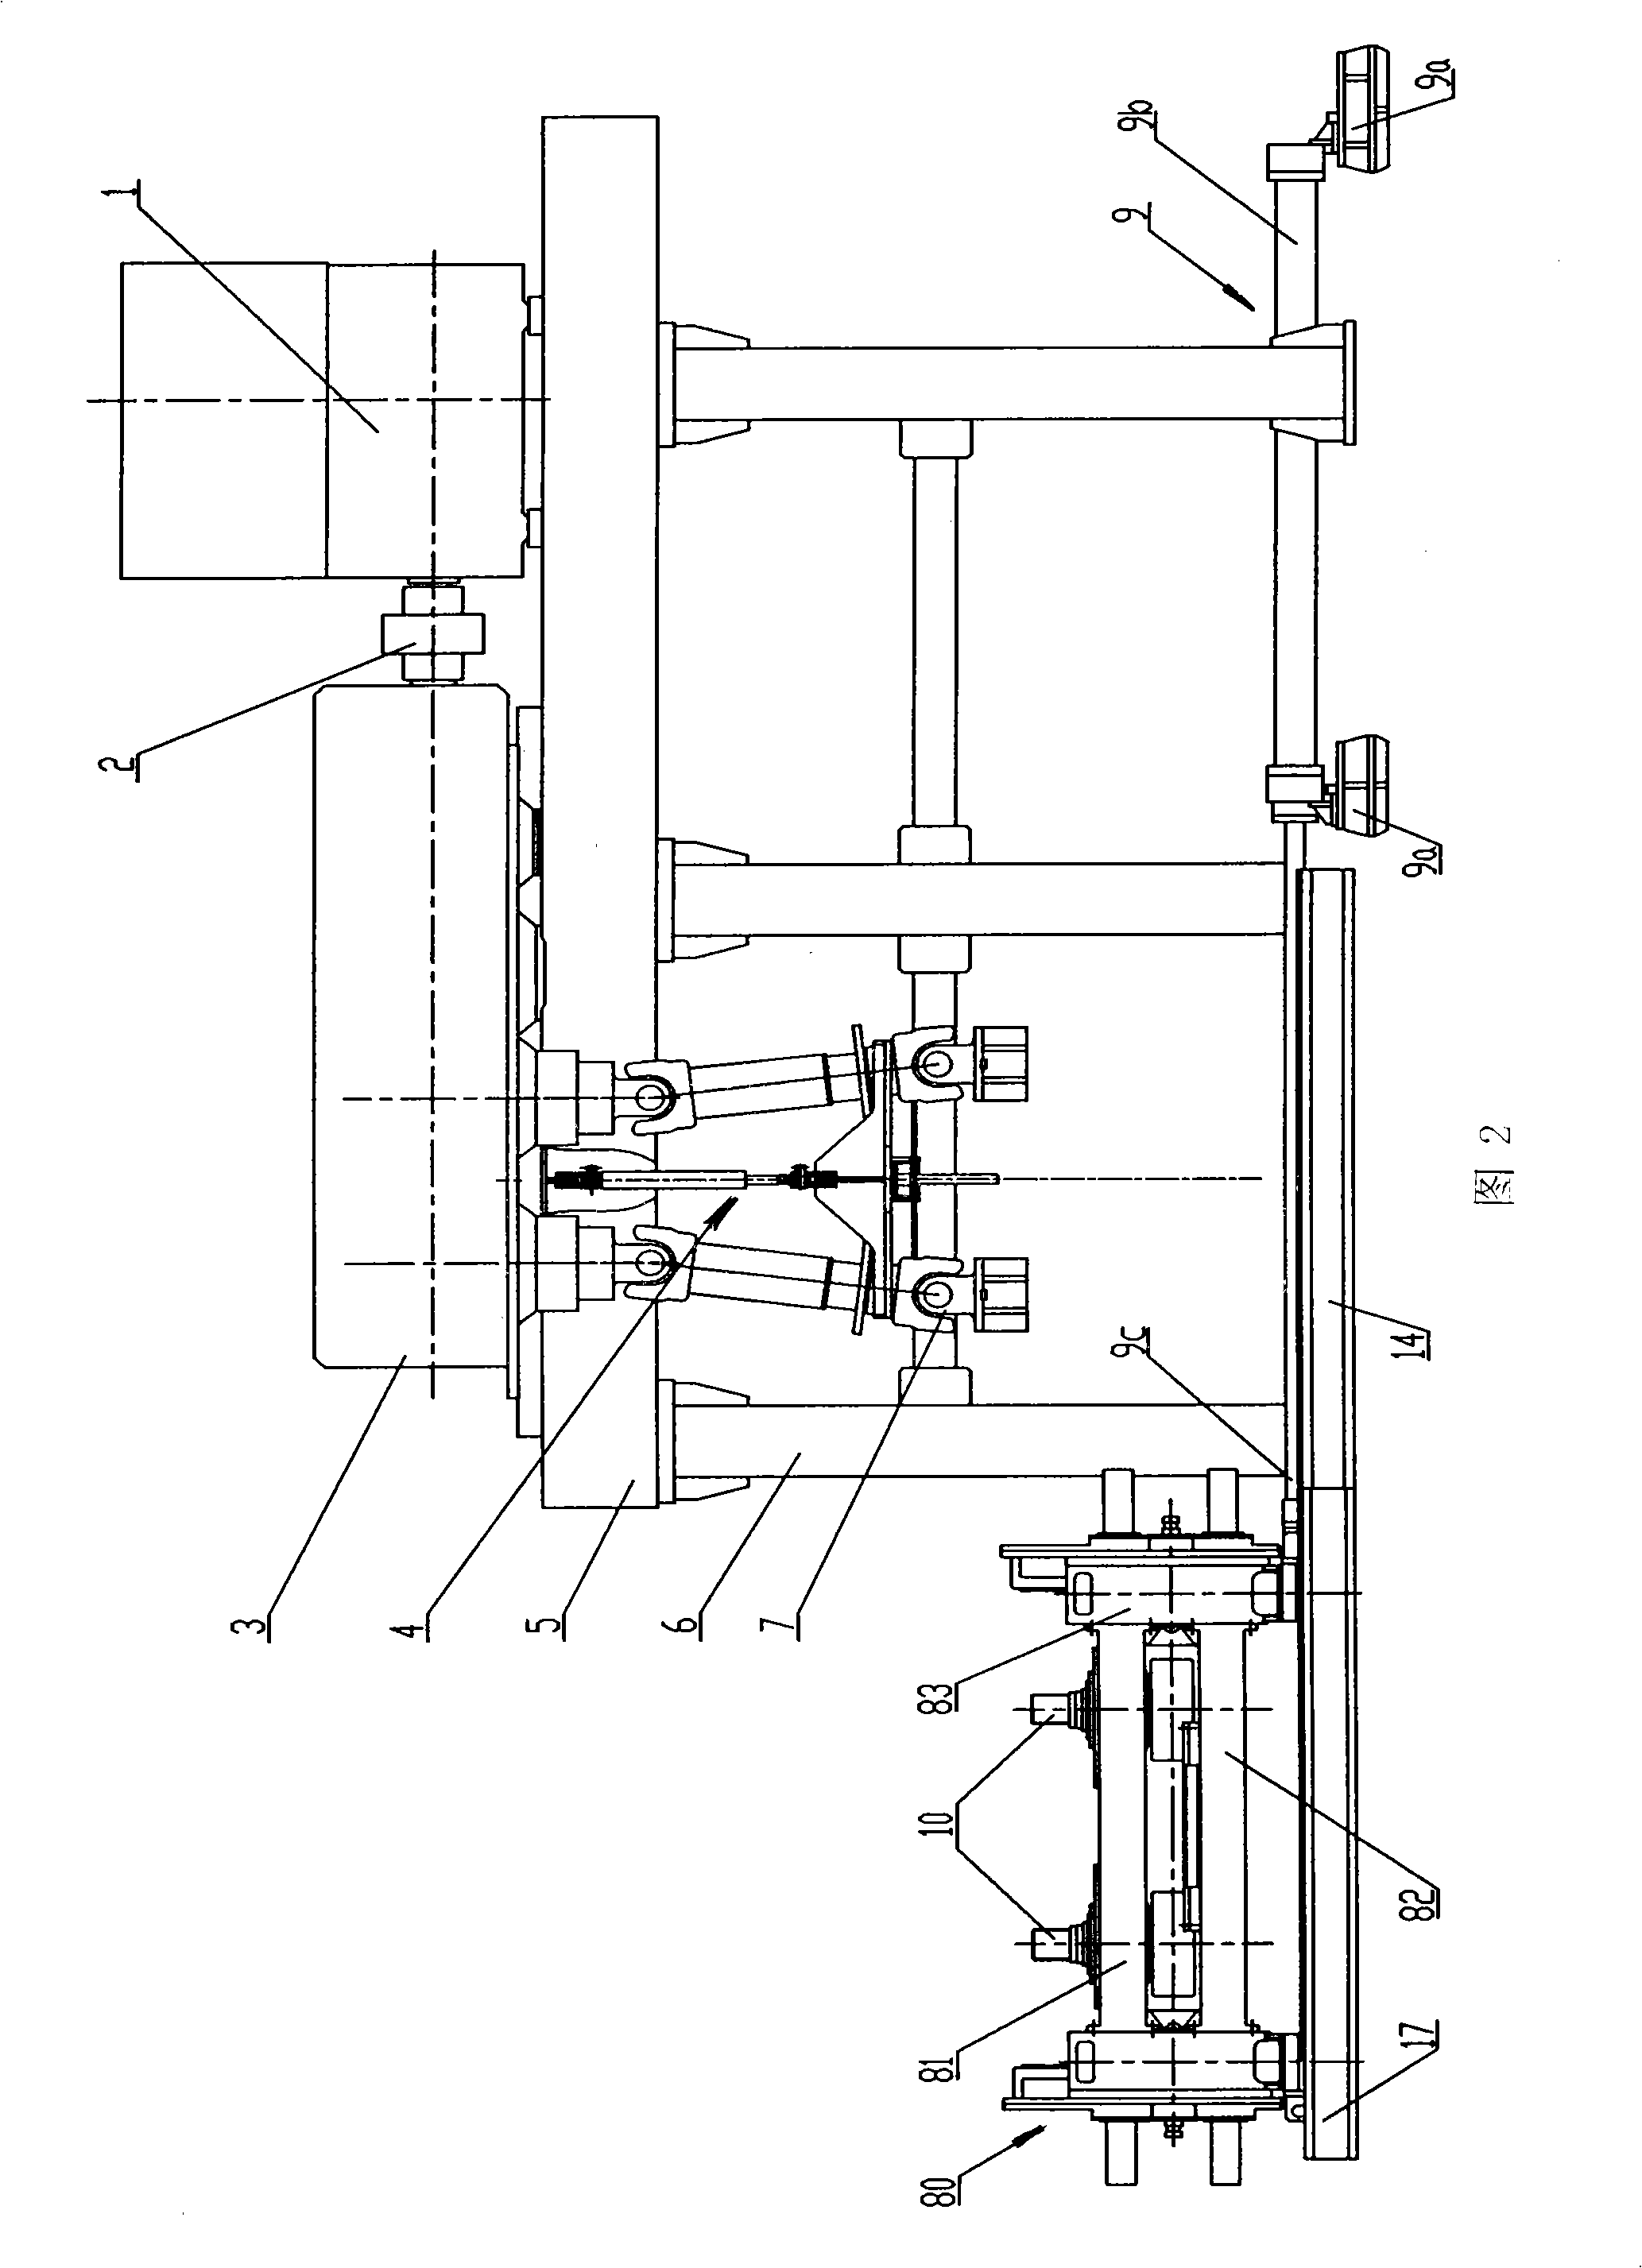 Vertical roller mill with side shifting roll-changer